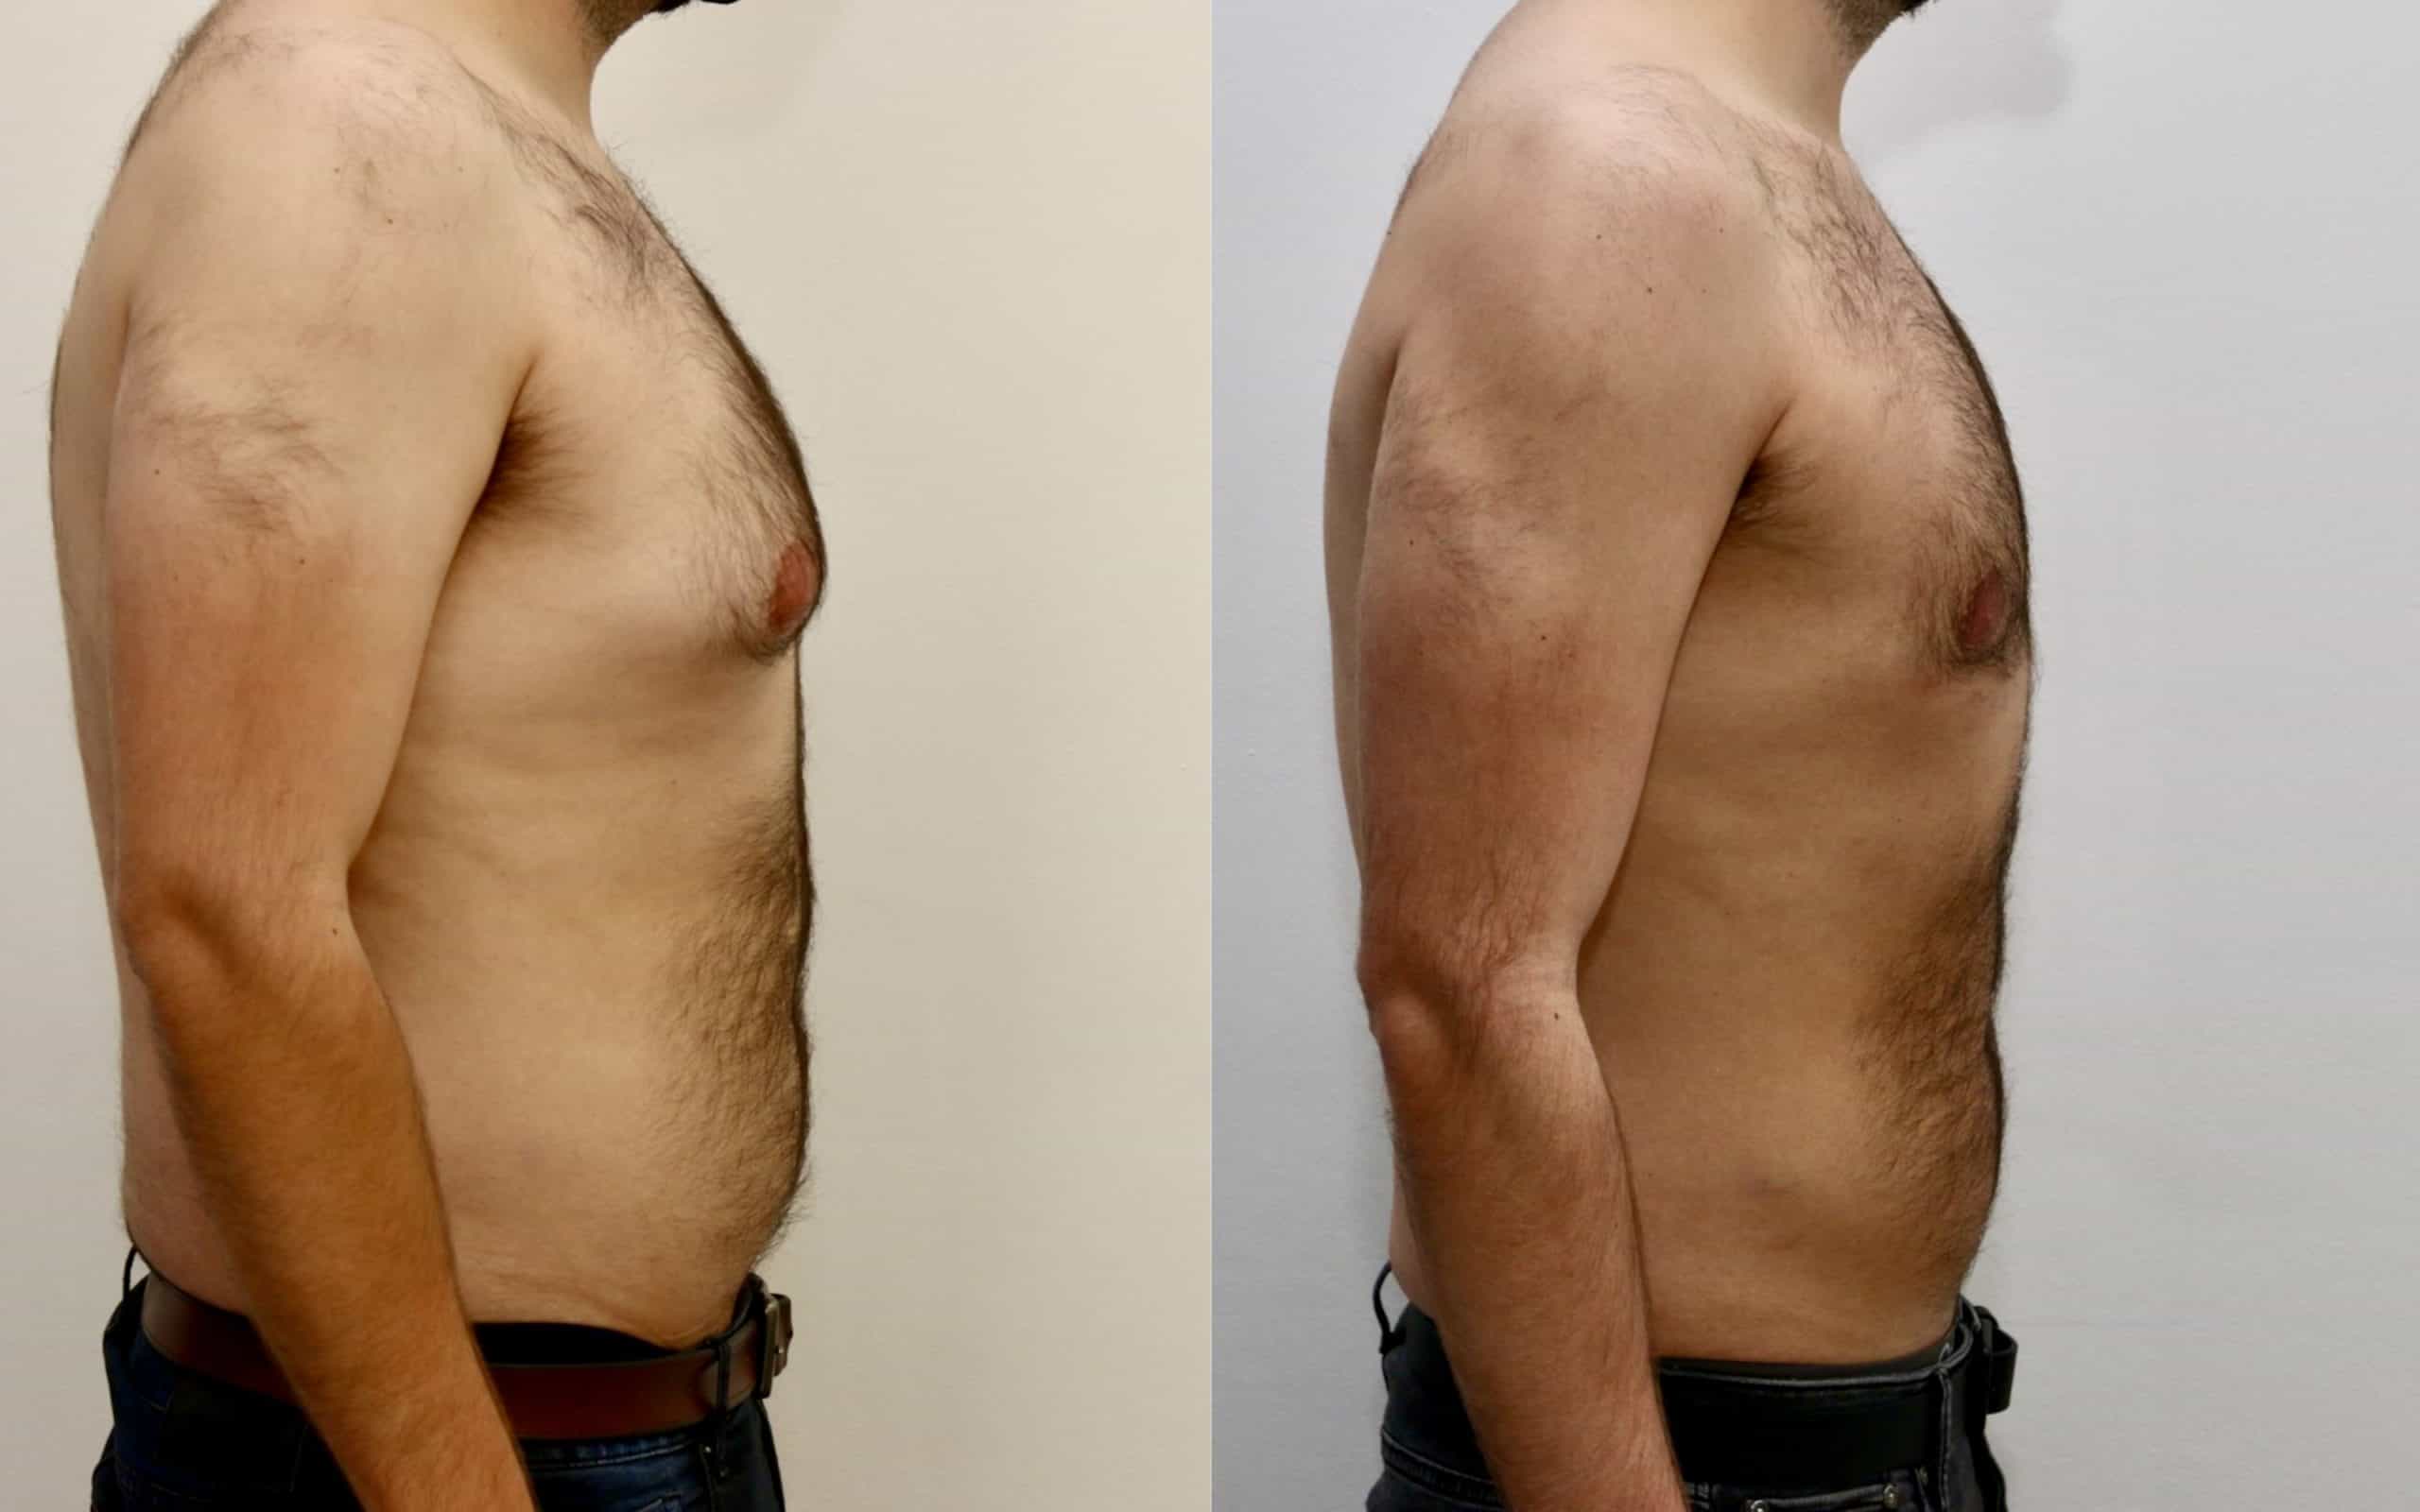 Gynecomastia before and after